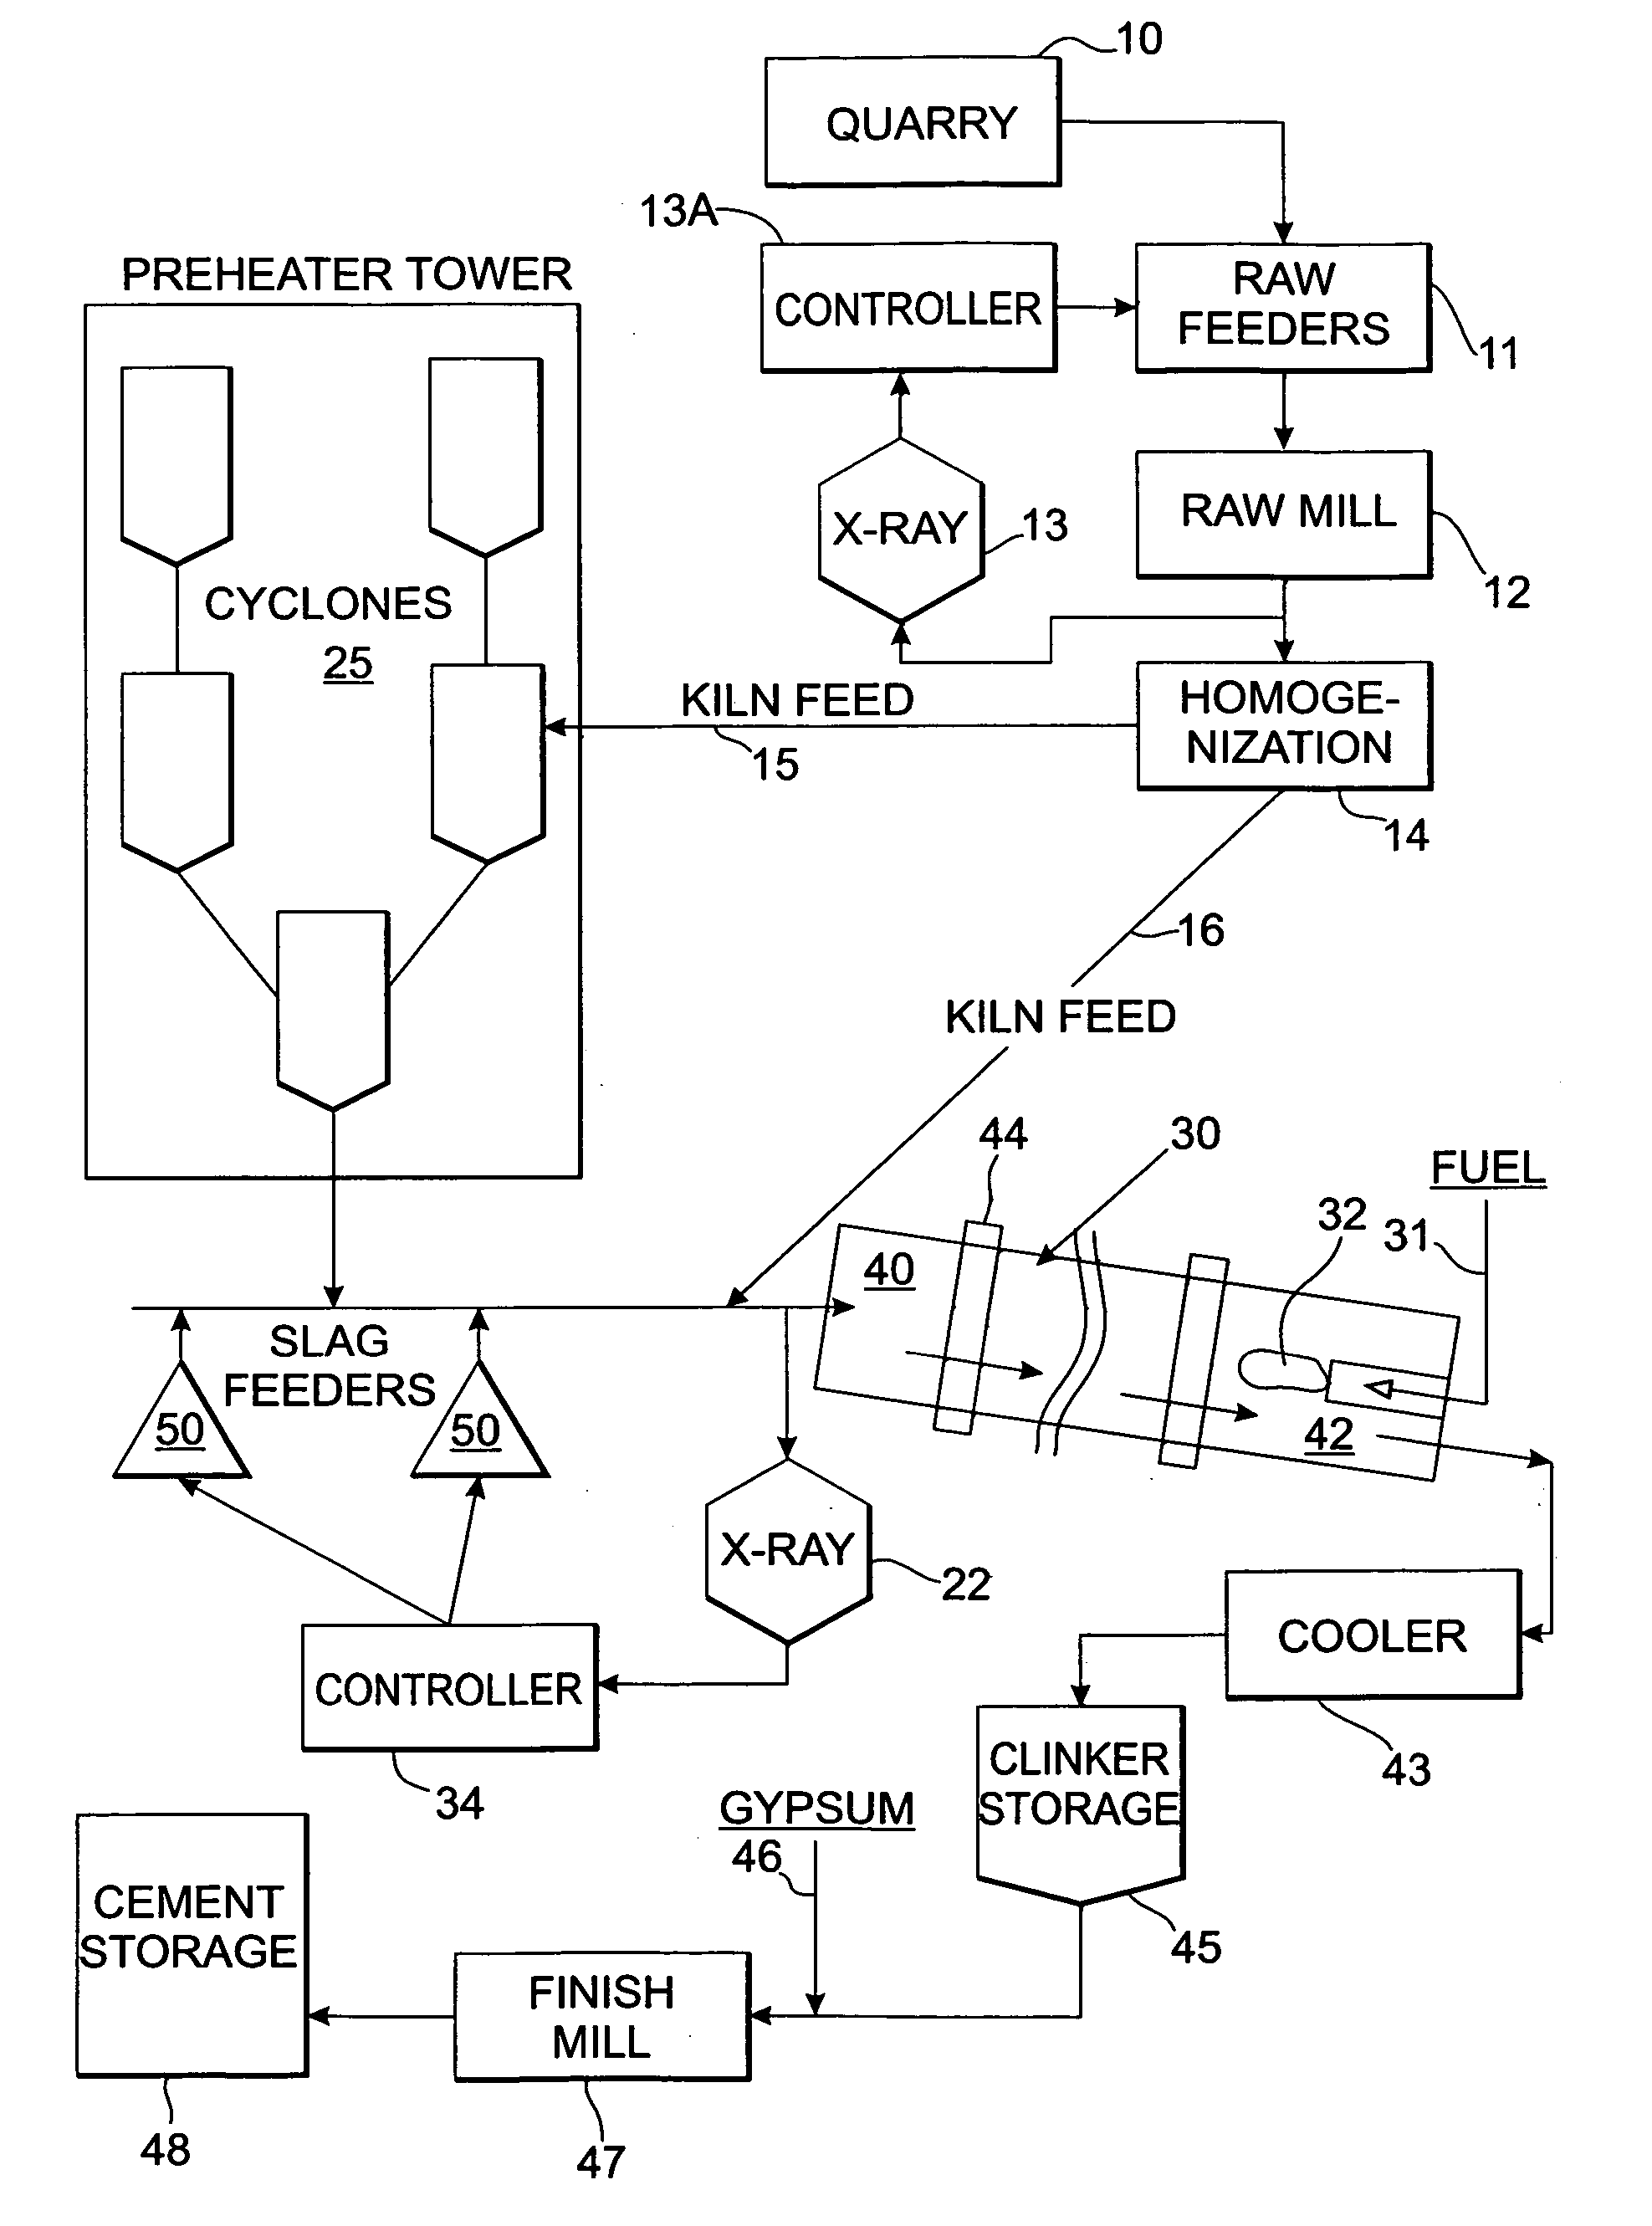 Method and apparatus for control of kiln feed chemistry in cement clinker production